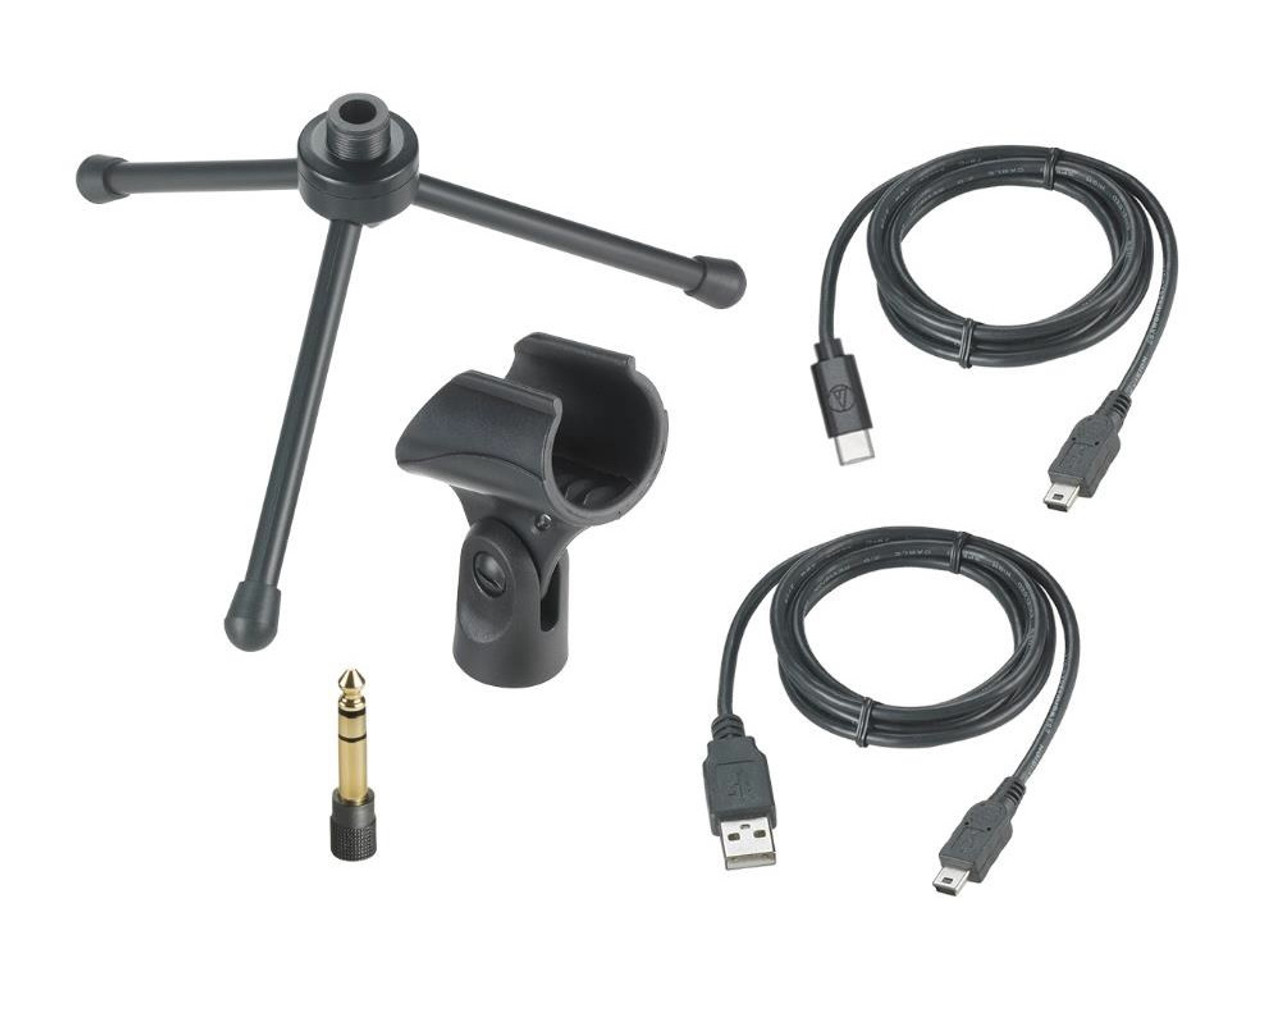 Audio-Technica AT2005USB Cardioid Dynamic USB/XLR Microphone and ATH-M20x Headphones + 4-Port USB 2.0 Hub with Individual LED Lit Power Switches + Mic